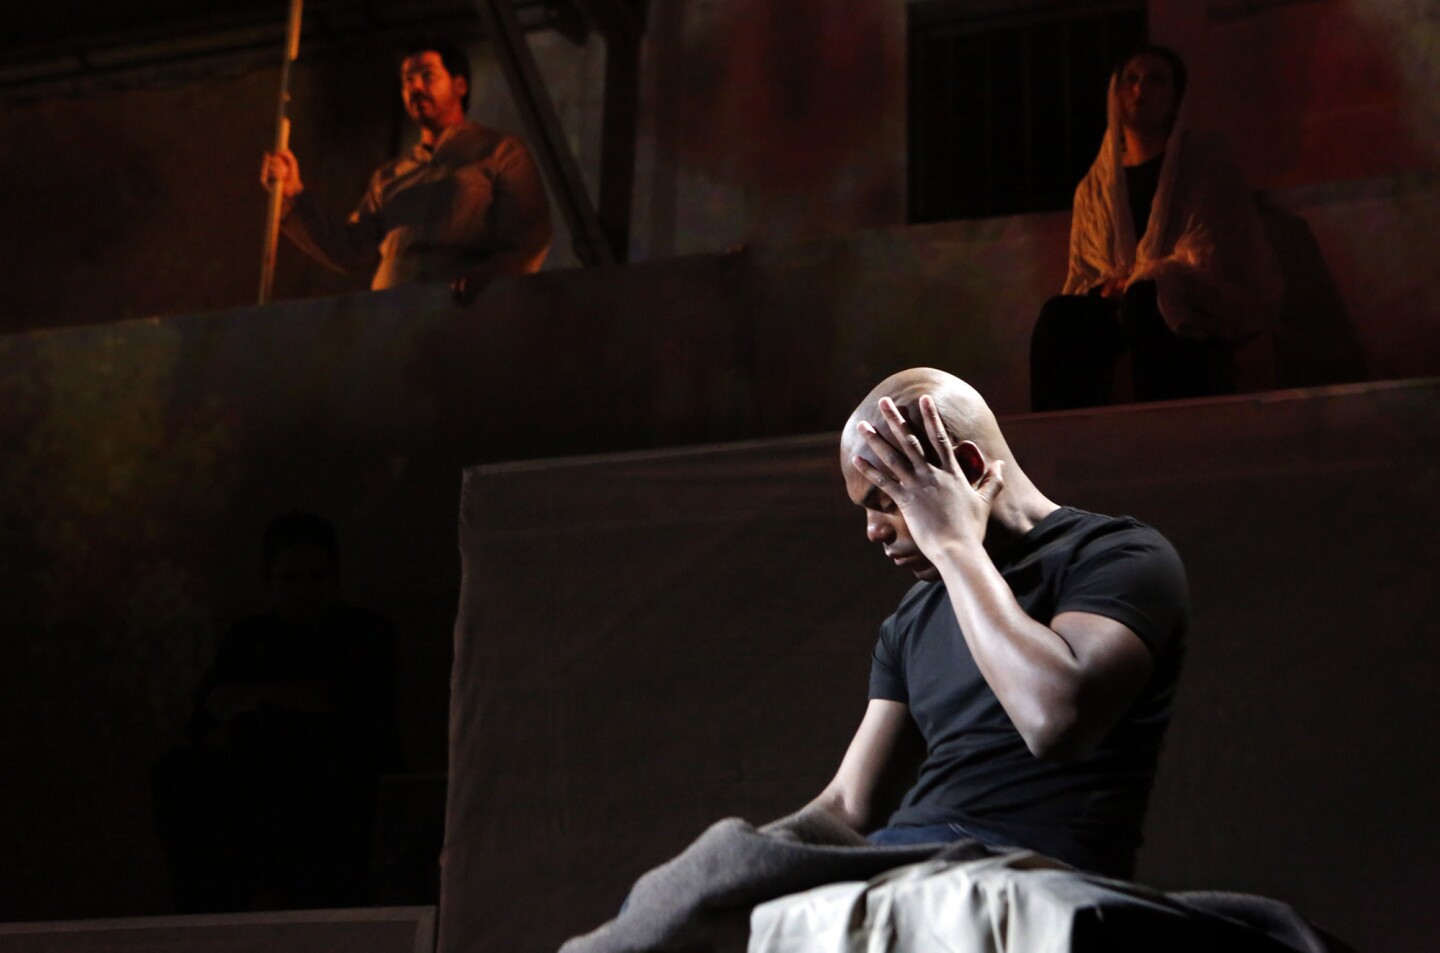 LaMarcus Miller, foreground, Zeffin Quinn Hollis, left, and Ani Maldjian perform a scene from the opera "Fallujah" at the Army National Guard in Long Beach.